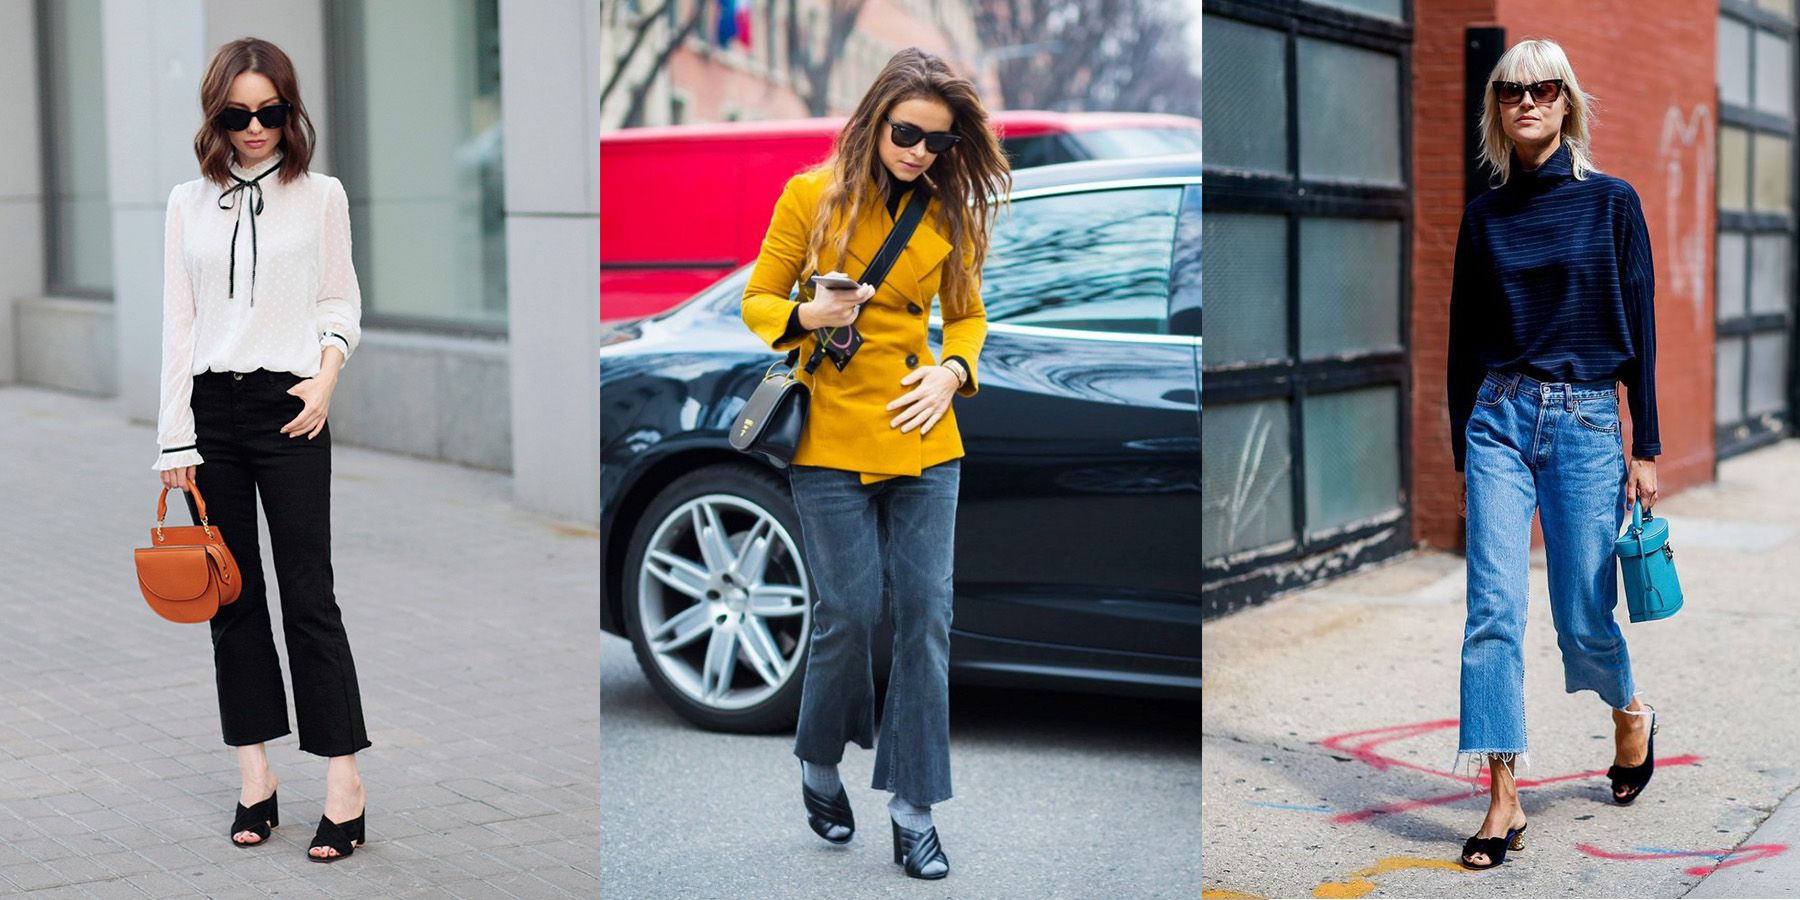 Check out 7 Secrets of Success to Look Cool Wearing Cropped Flare Pants